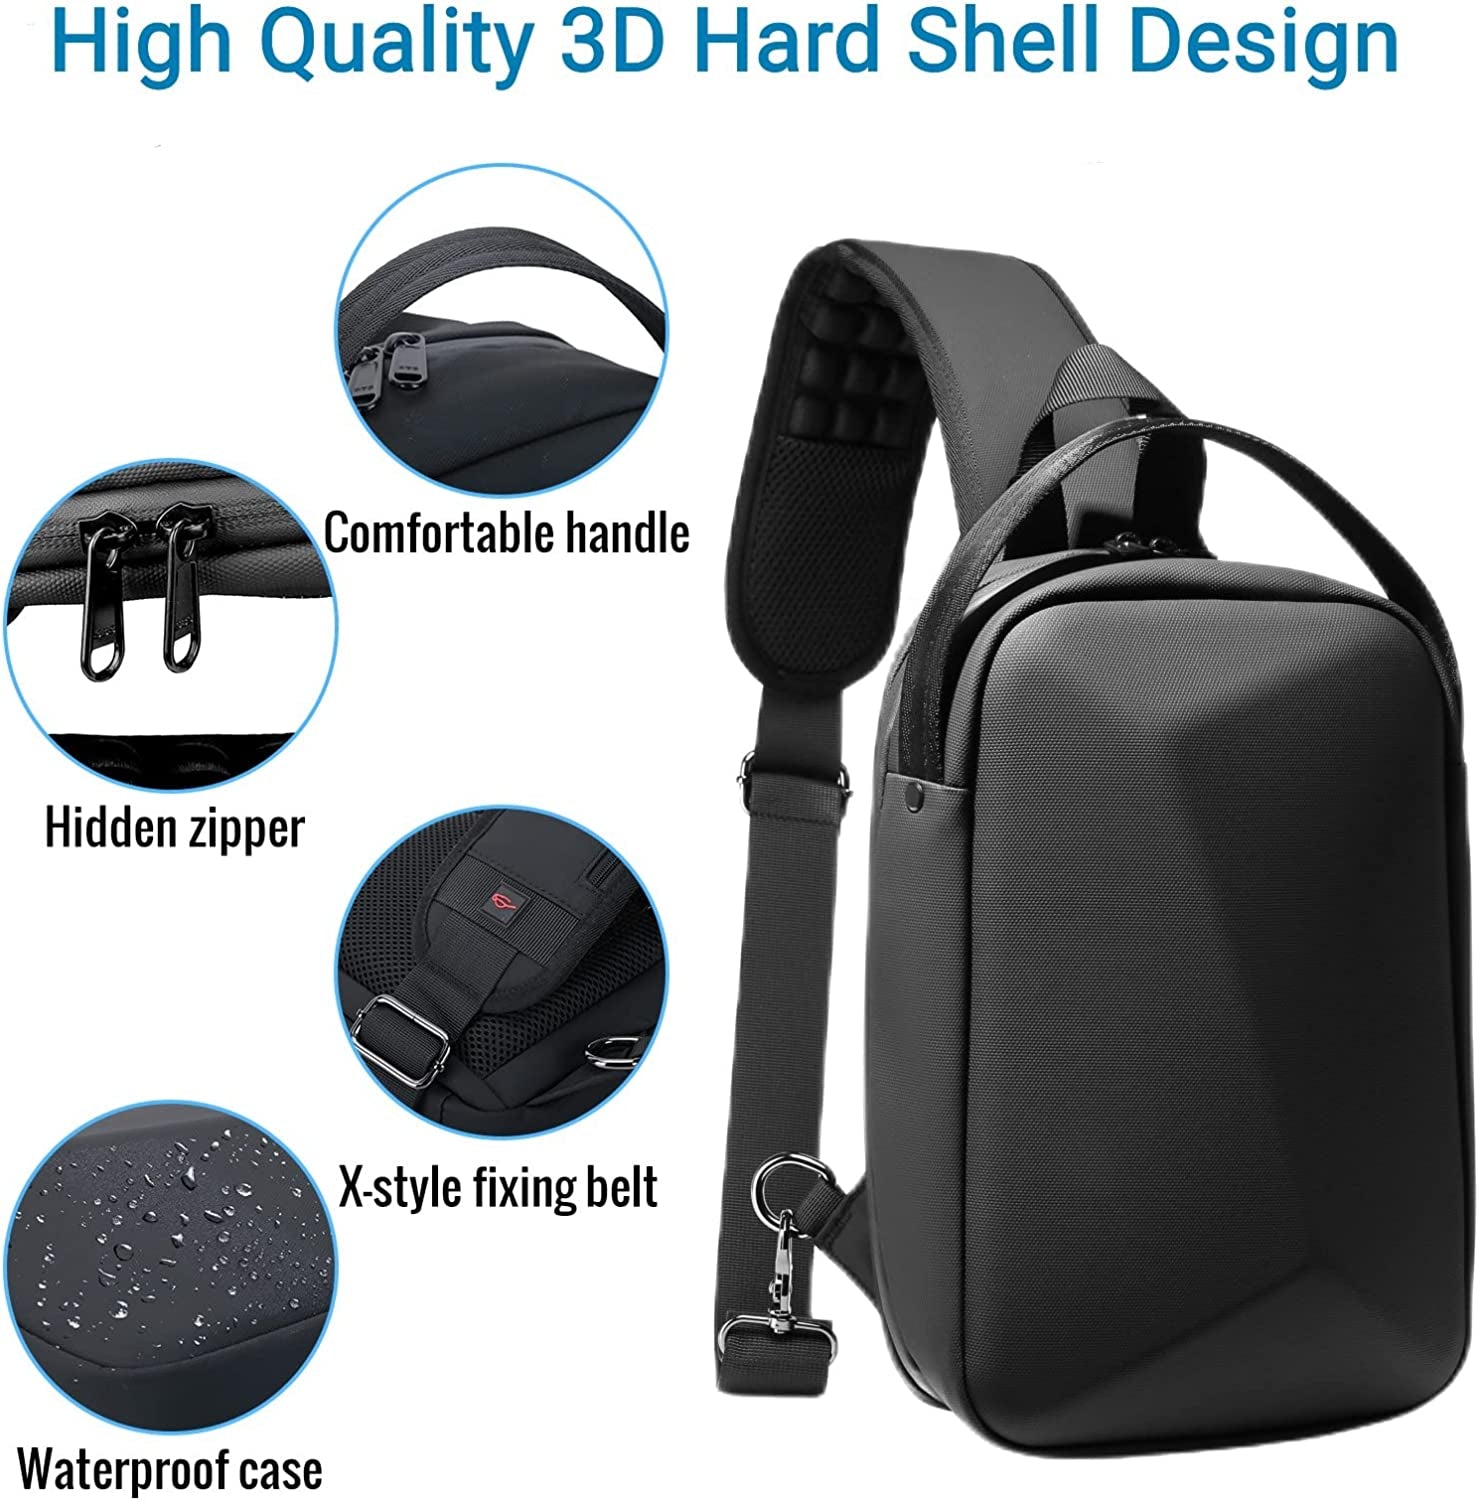 Carrying Case for Oculus Quest 2/Meta Quest Pro, Hard Travel Case for Meta Quest Pro VR Gaming Elite Strap Headset and Oculus Quest 2 Accessories Crossbody Shoulder Chest Backpack